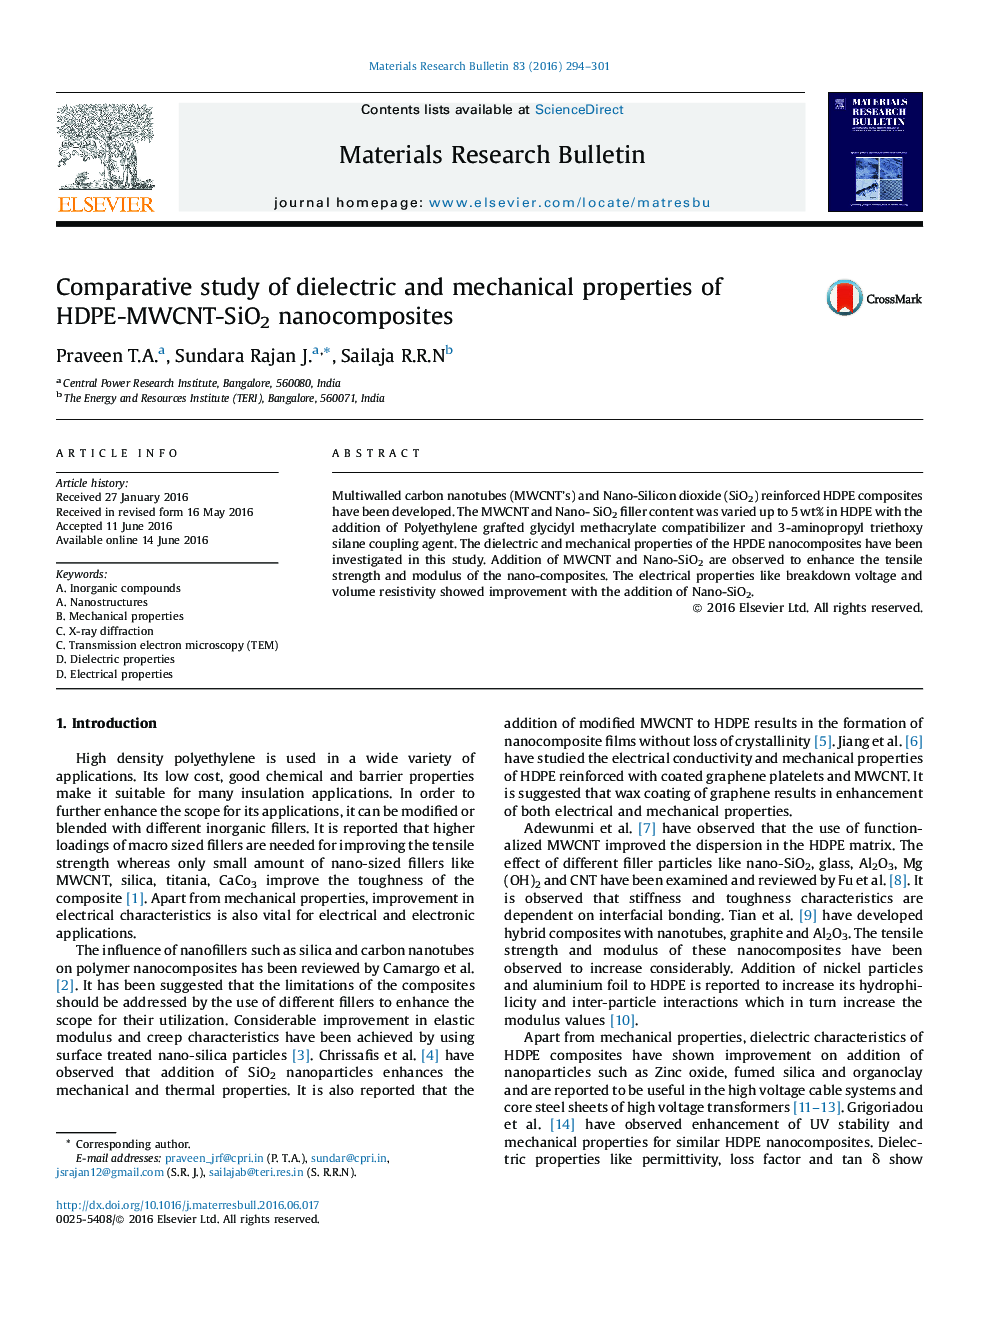 Comparative study of dielectric and mechanical properties of HDPE-MWCNT-SiO2 nanocomposites